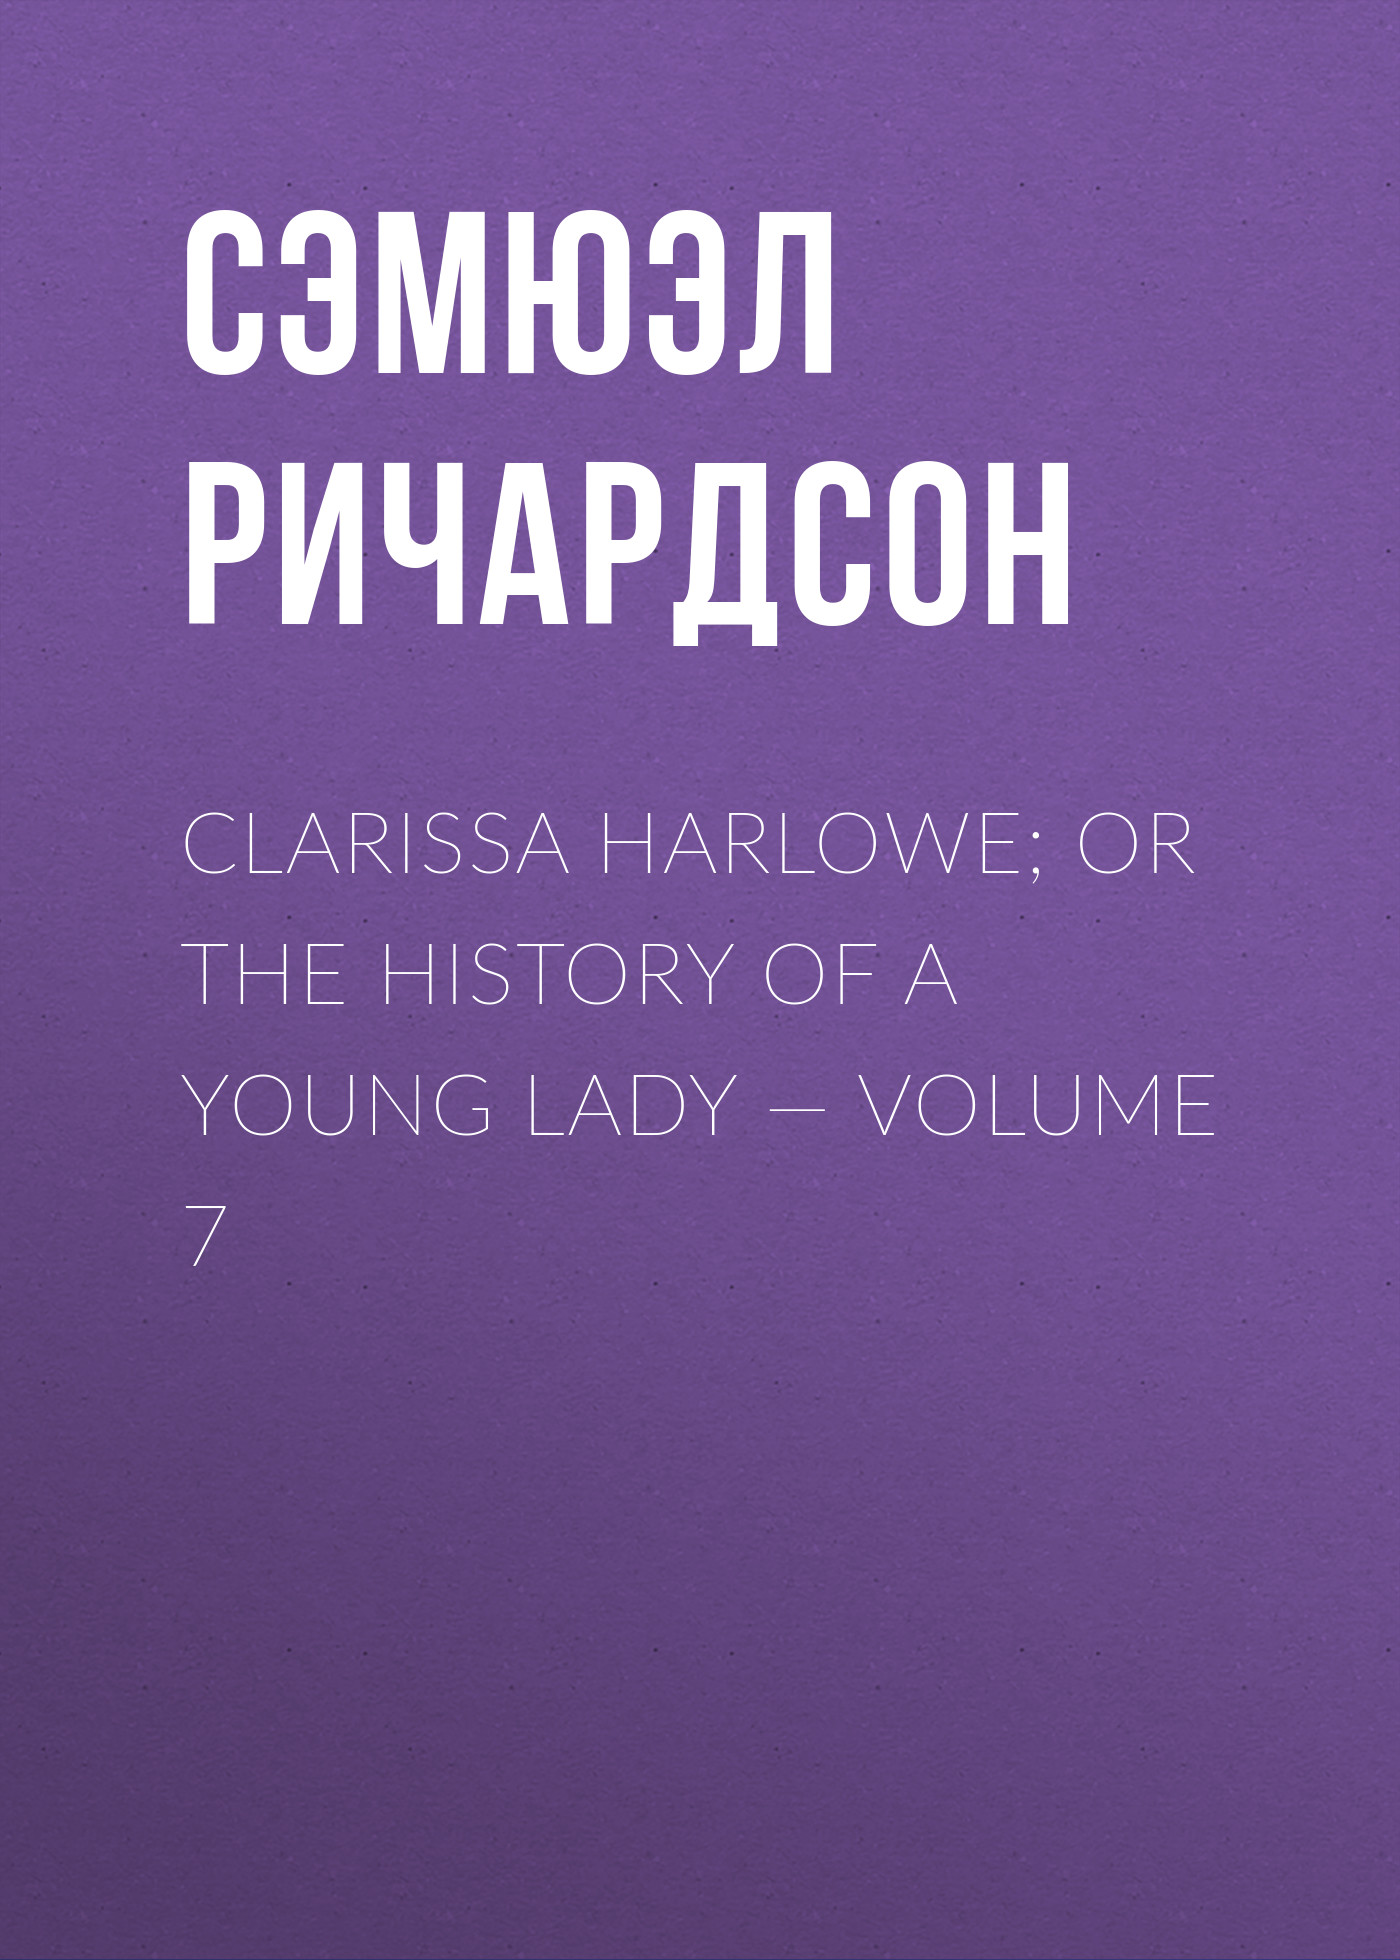 Clarissa Harlowe; or the history of a young lady— Volume 7